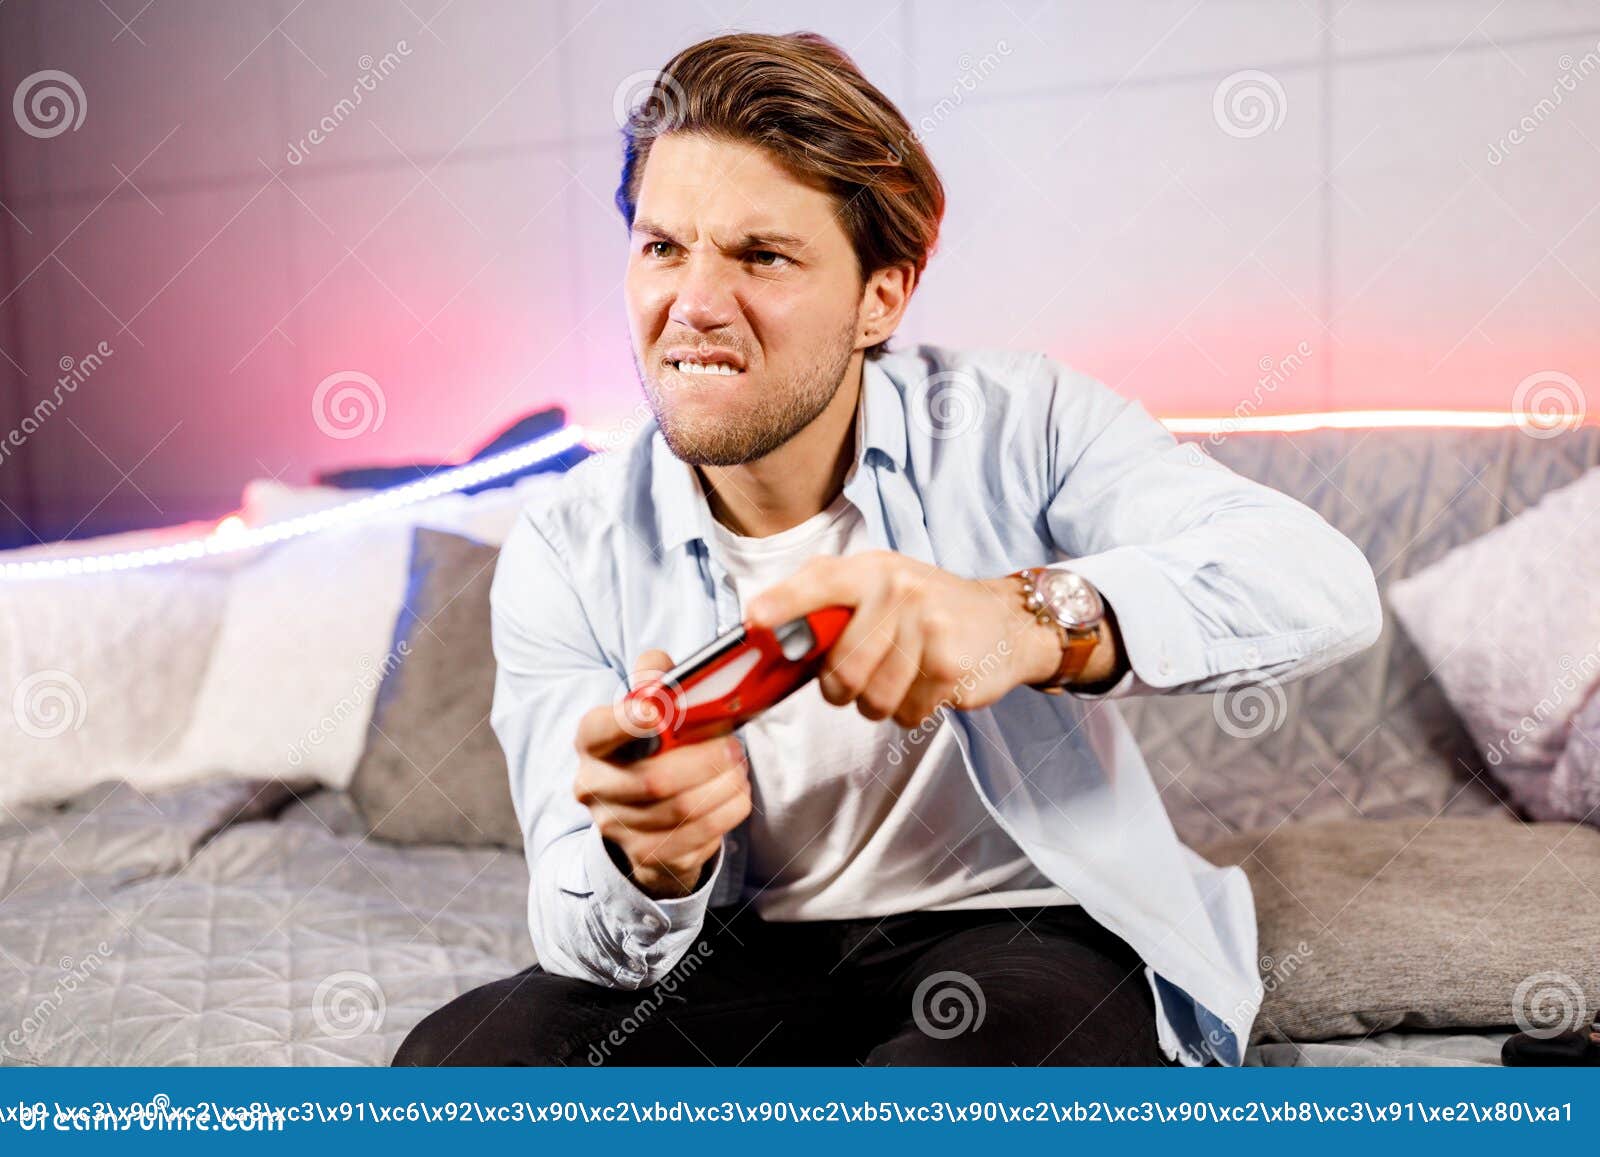 side view of venturous millennial male sit on neon sofa at home, having fun playing video games with red game pad